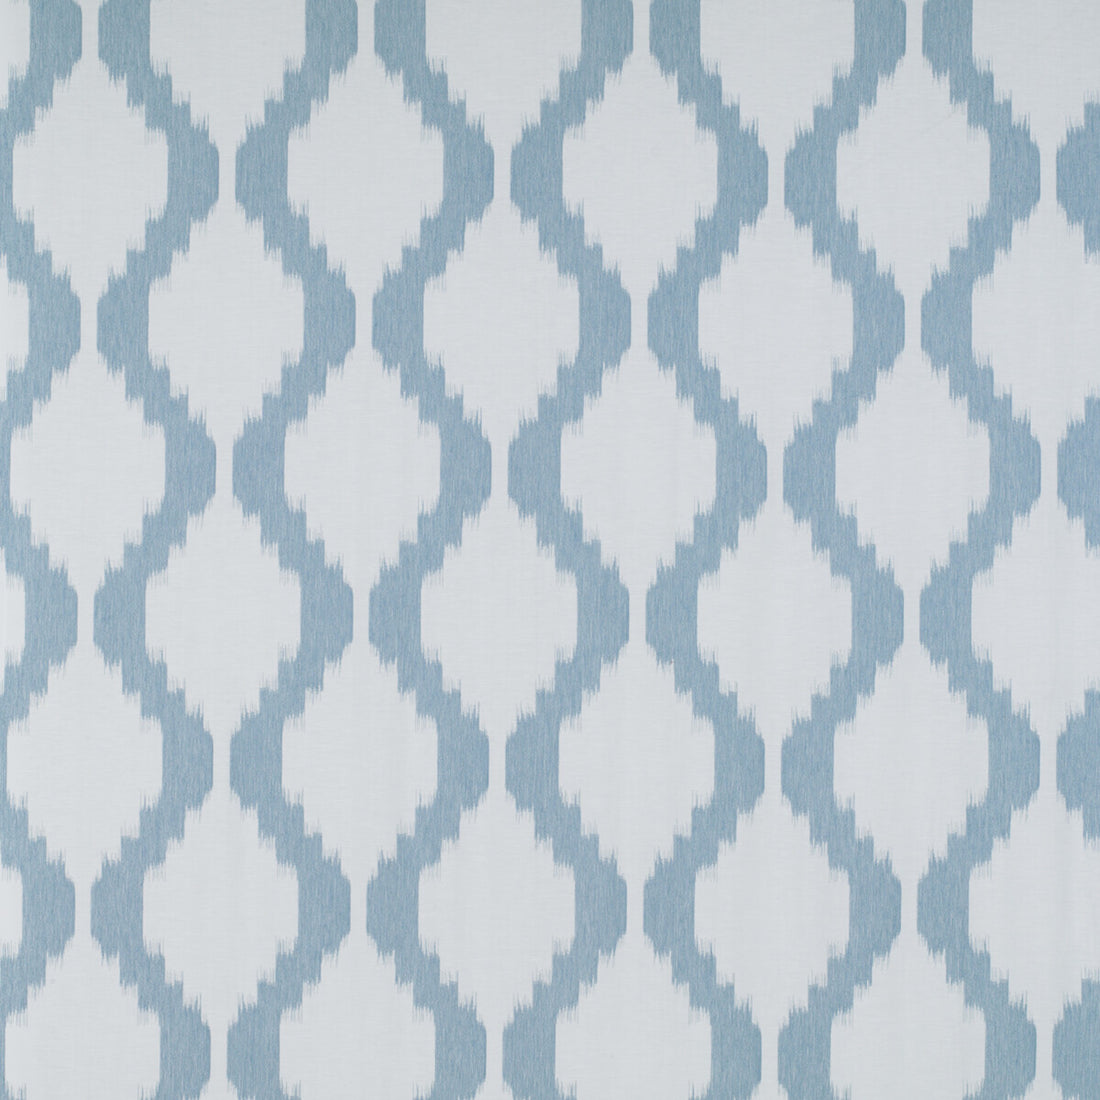 Kf Gyd fabric - pattern GDT5311.004.0 - by Gaston y Daniela in the Tierras collection